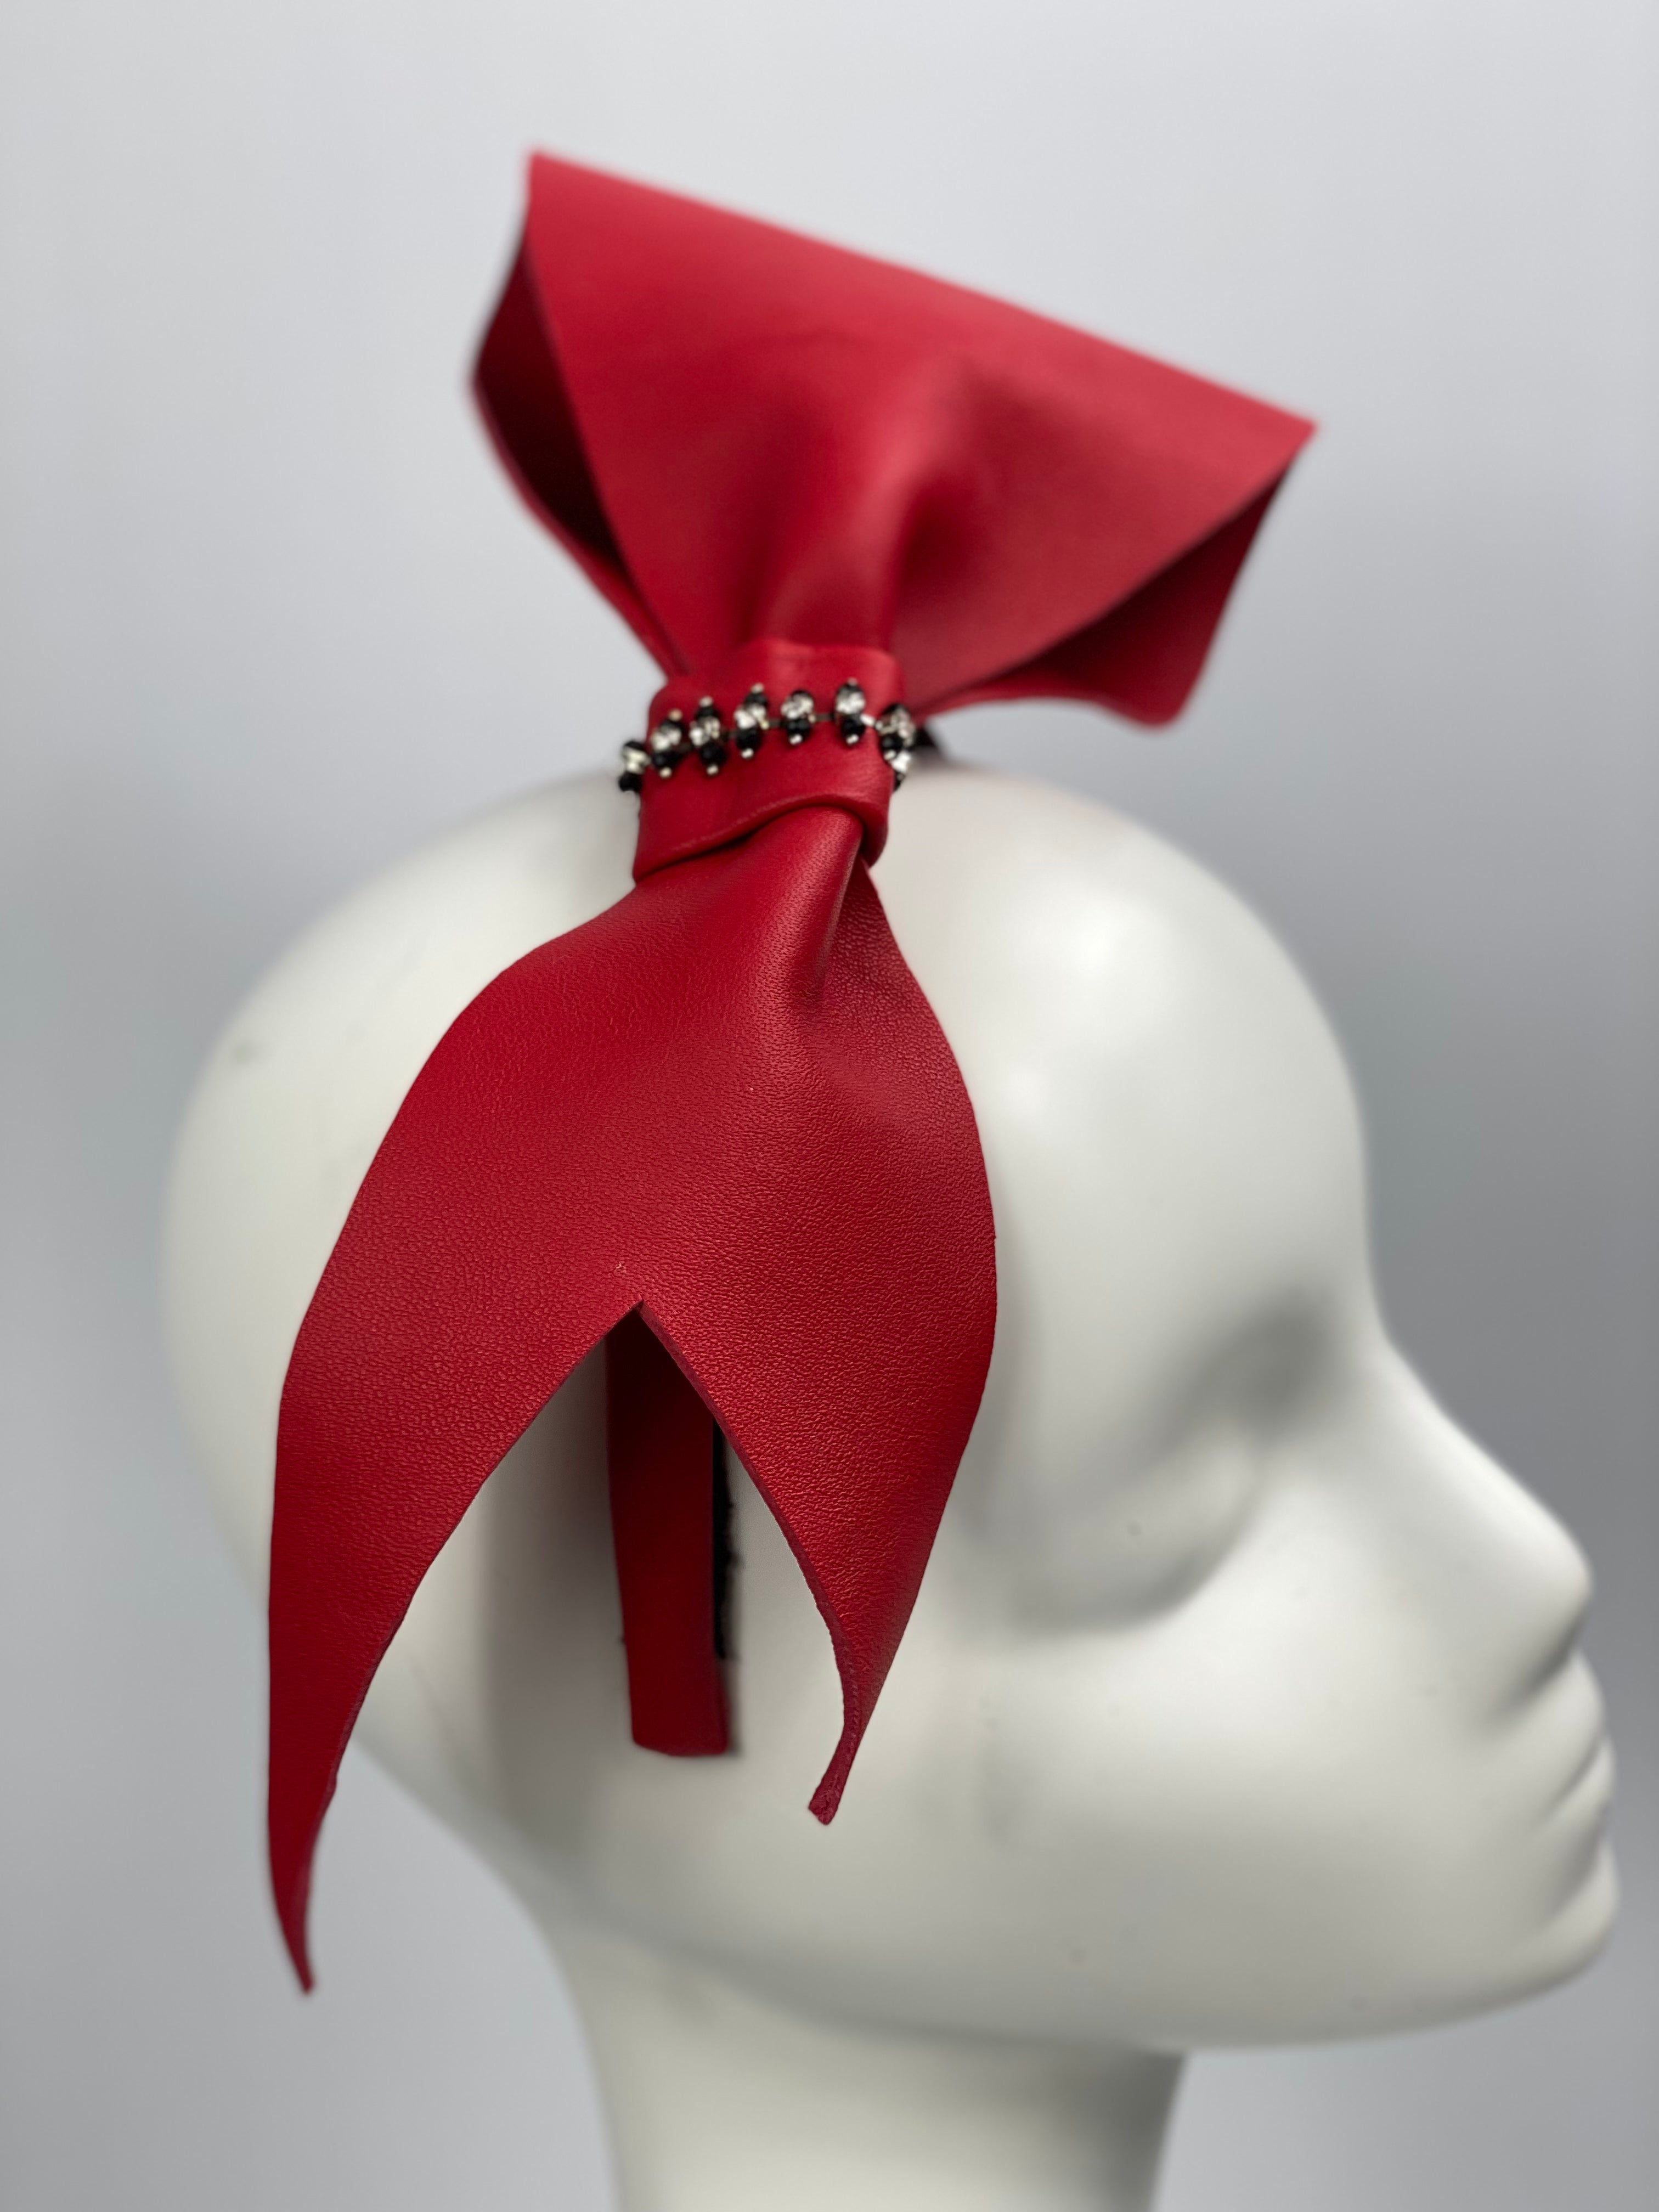 BELLA Large Red Leather Bow on Red Leather Headband Fascinator